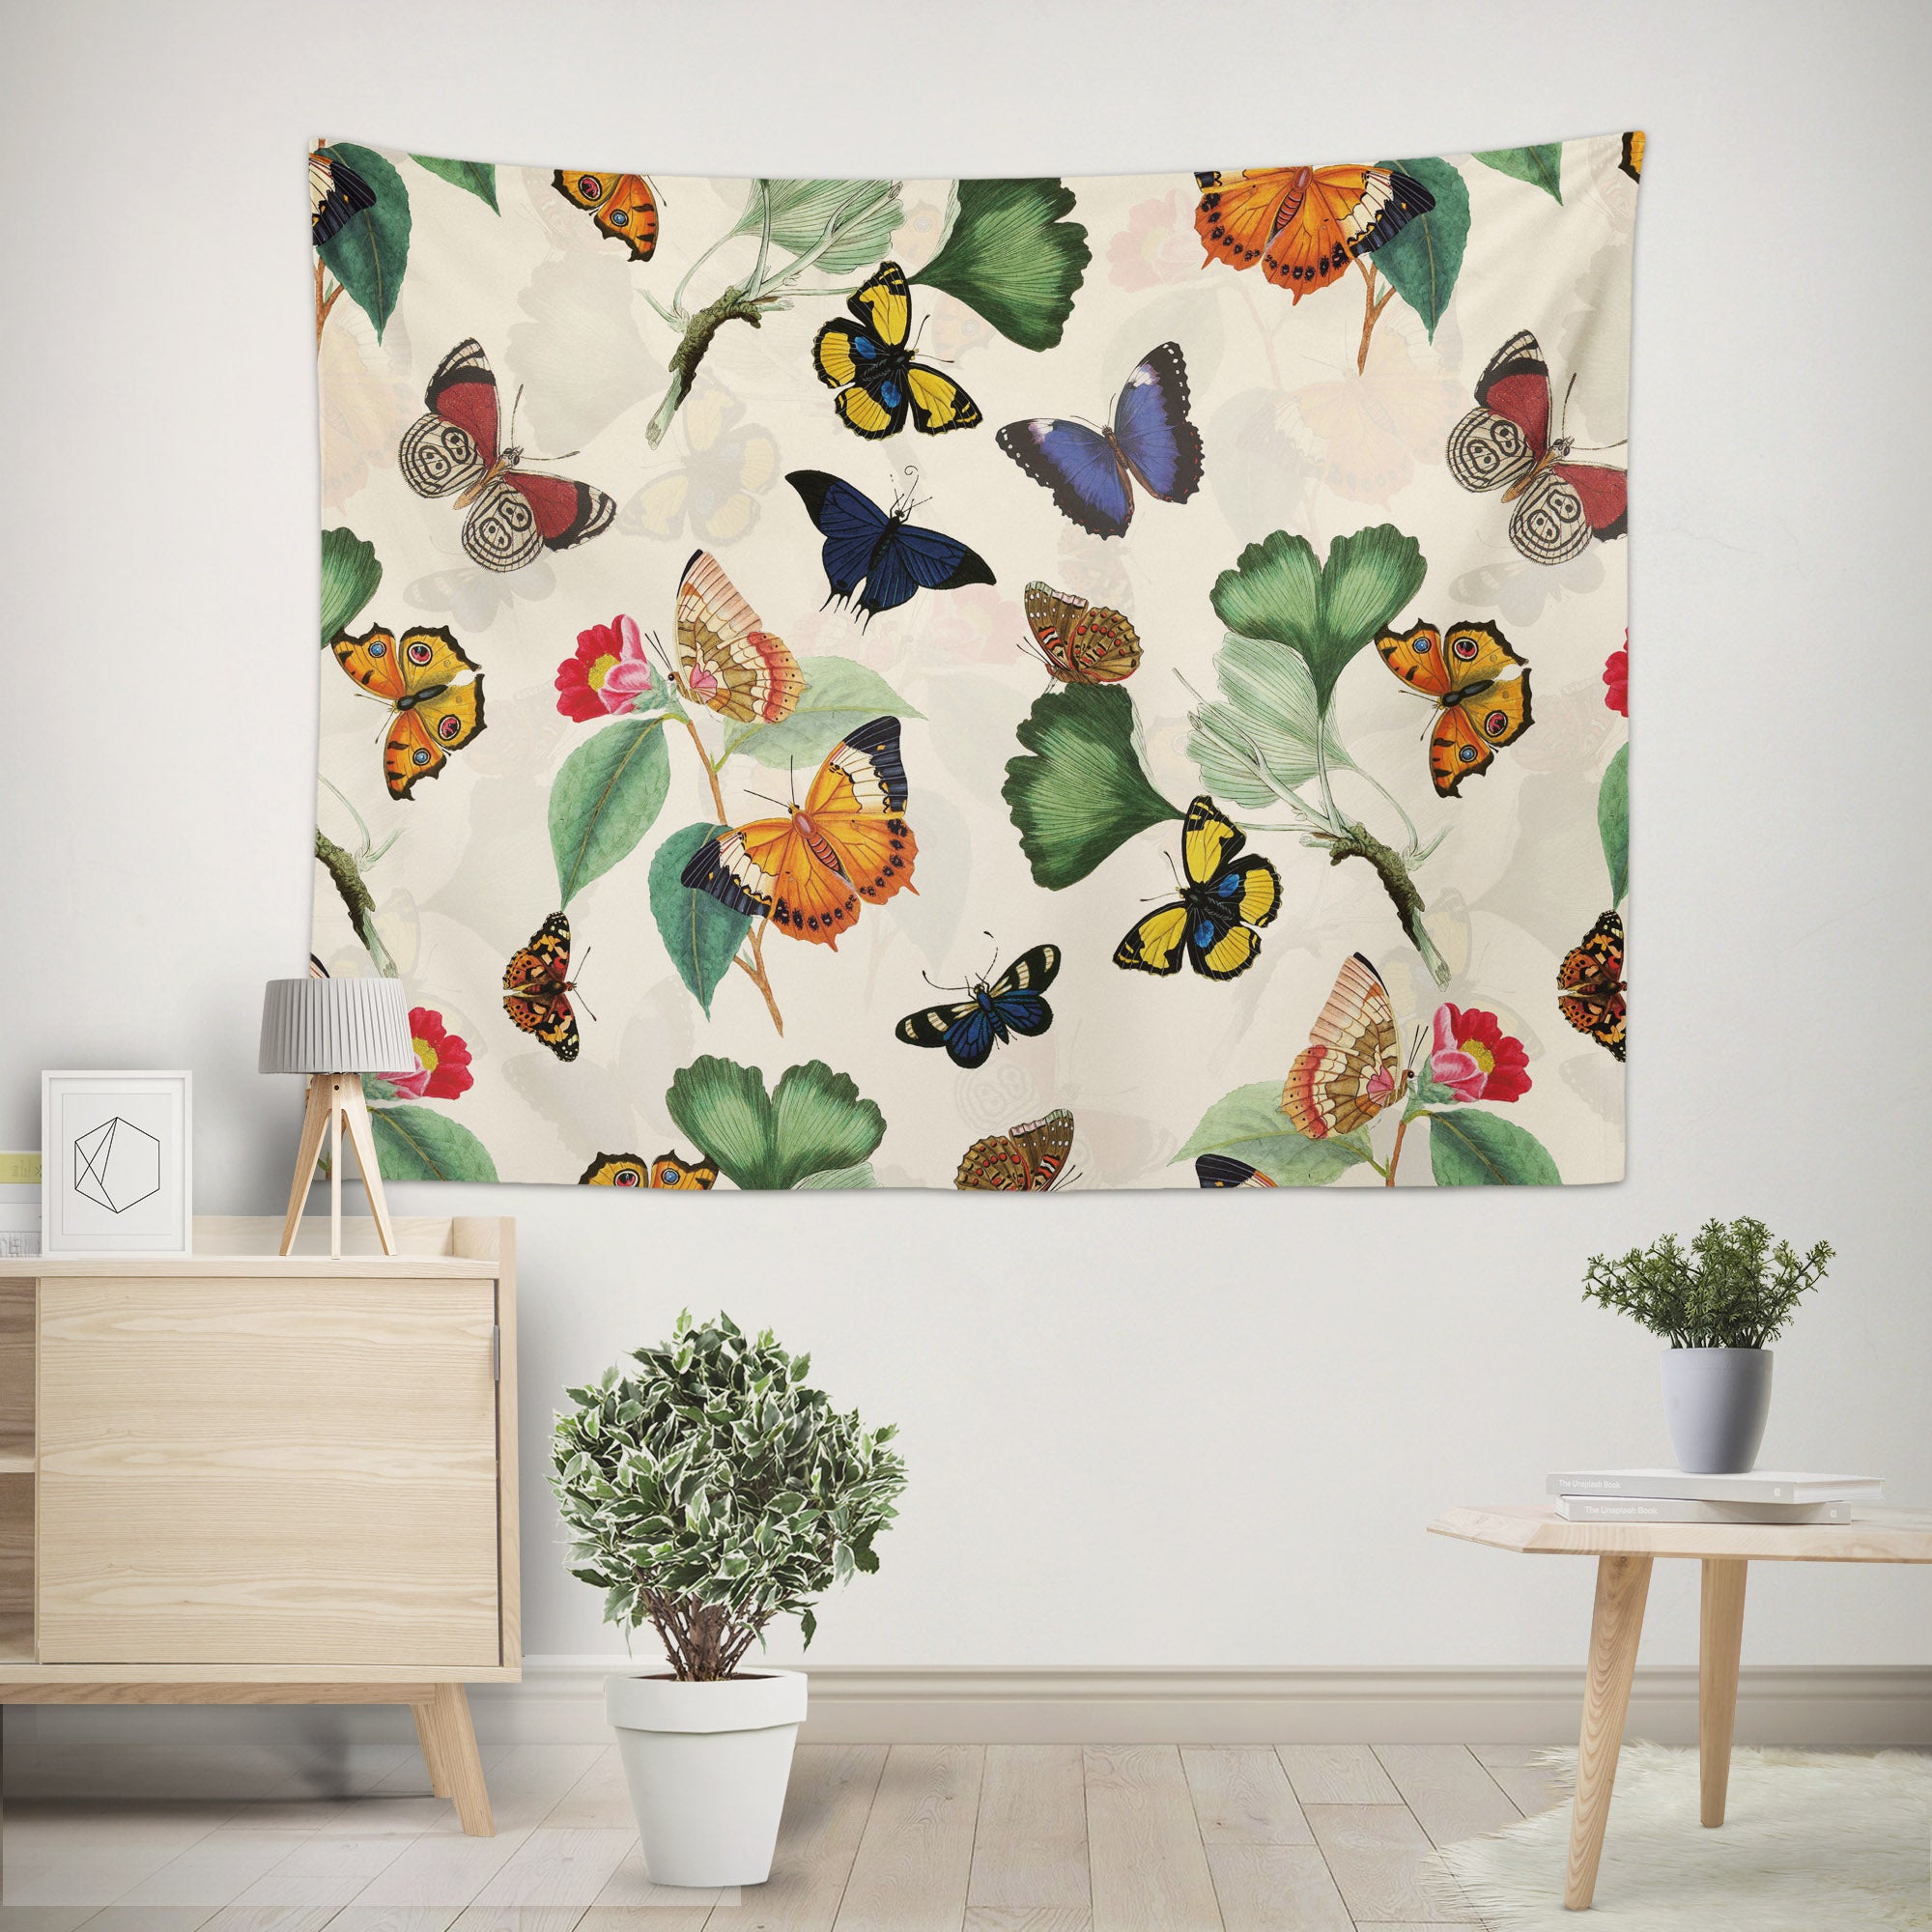 3D Colorful Butterfly 5324 Uta Naumann Tapestry Hanging Cloth Hang